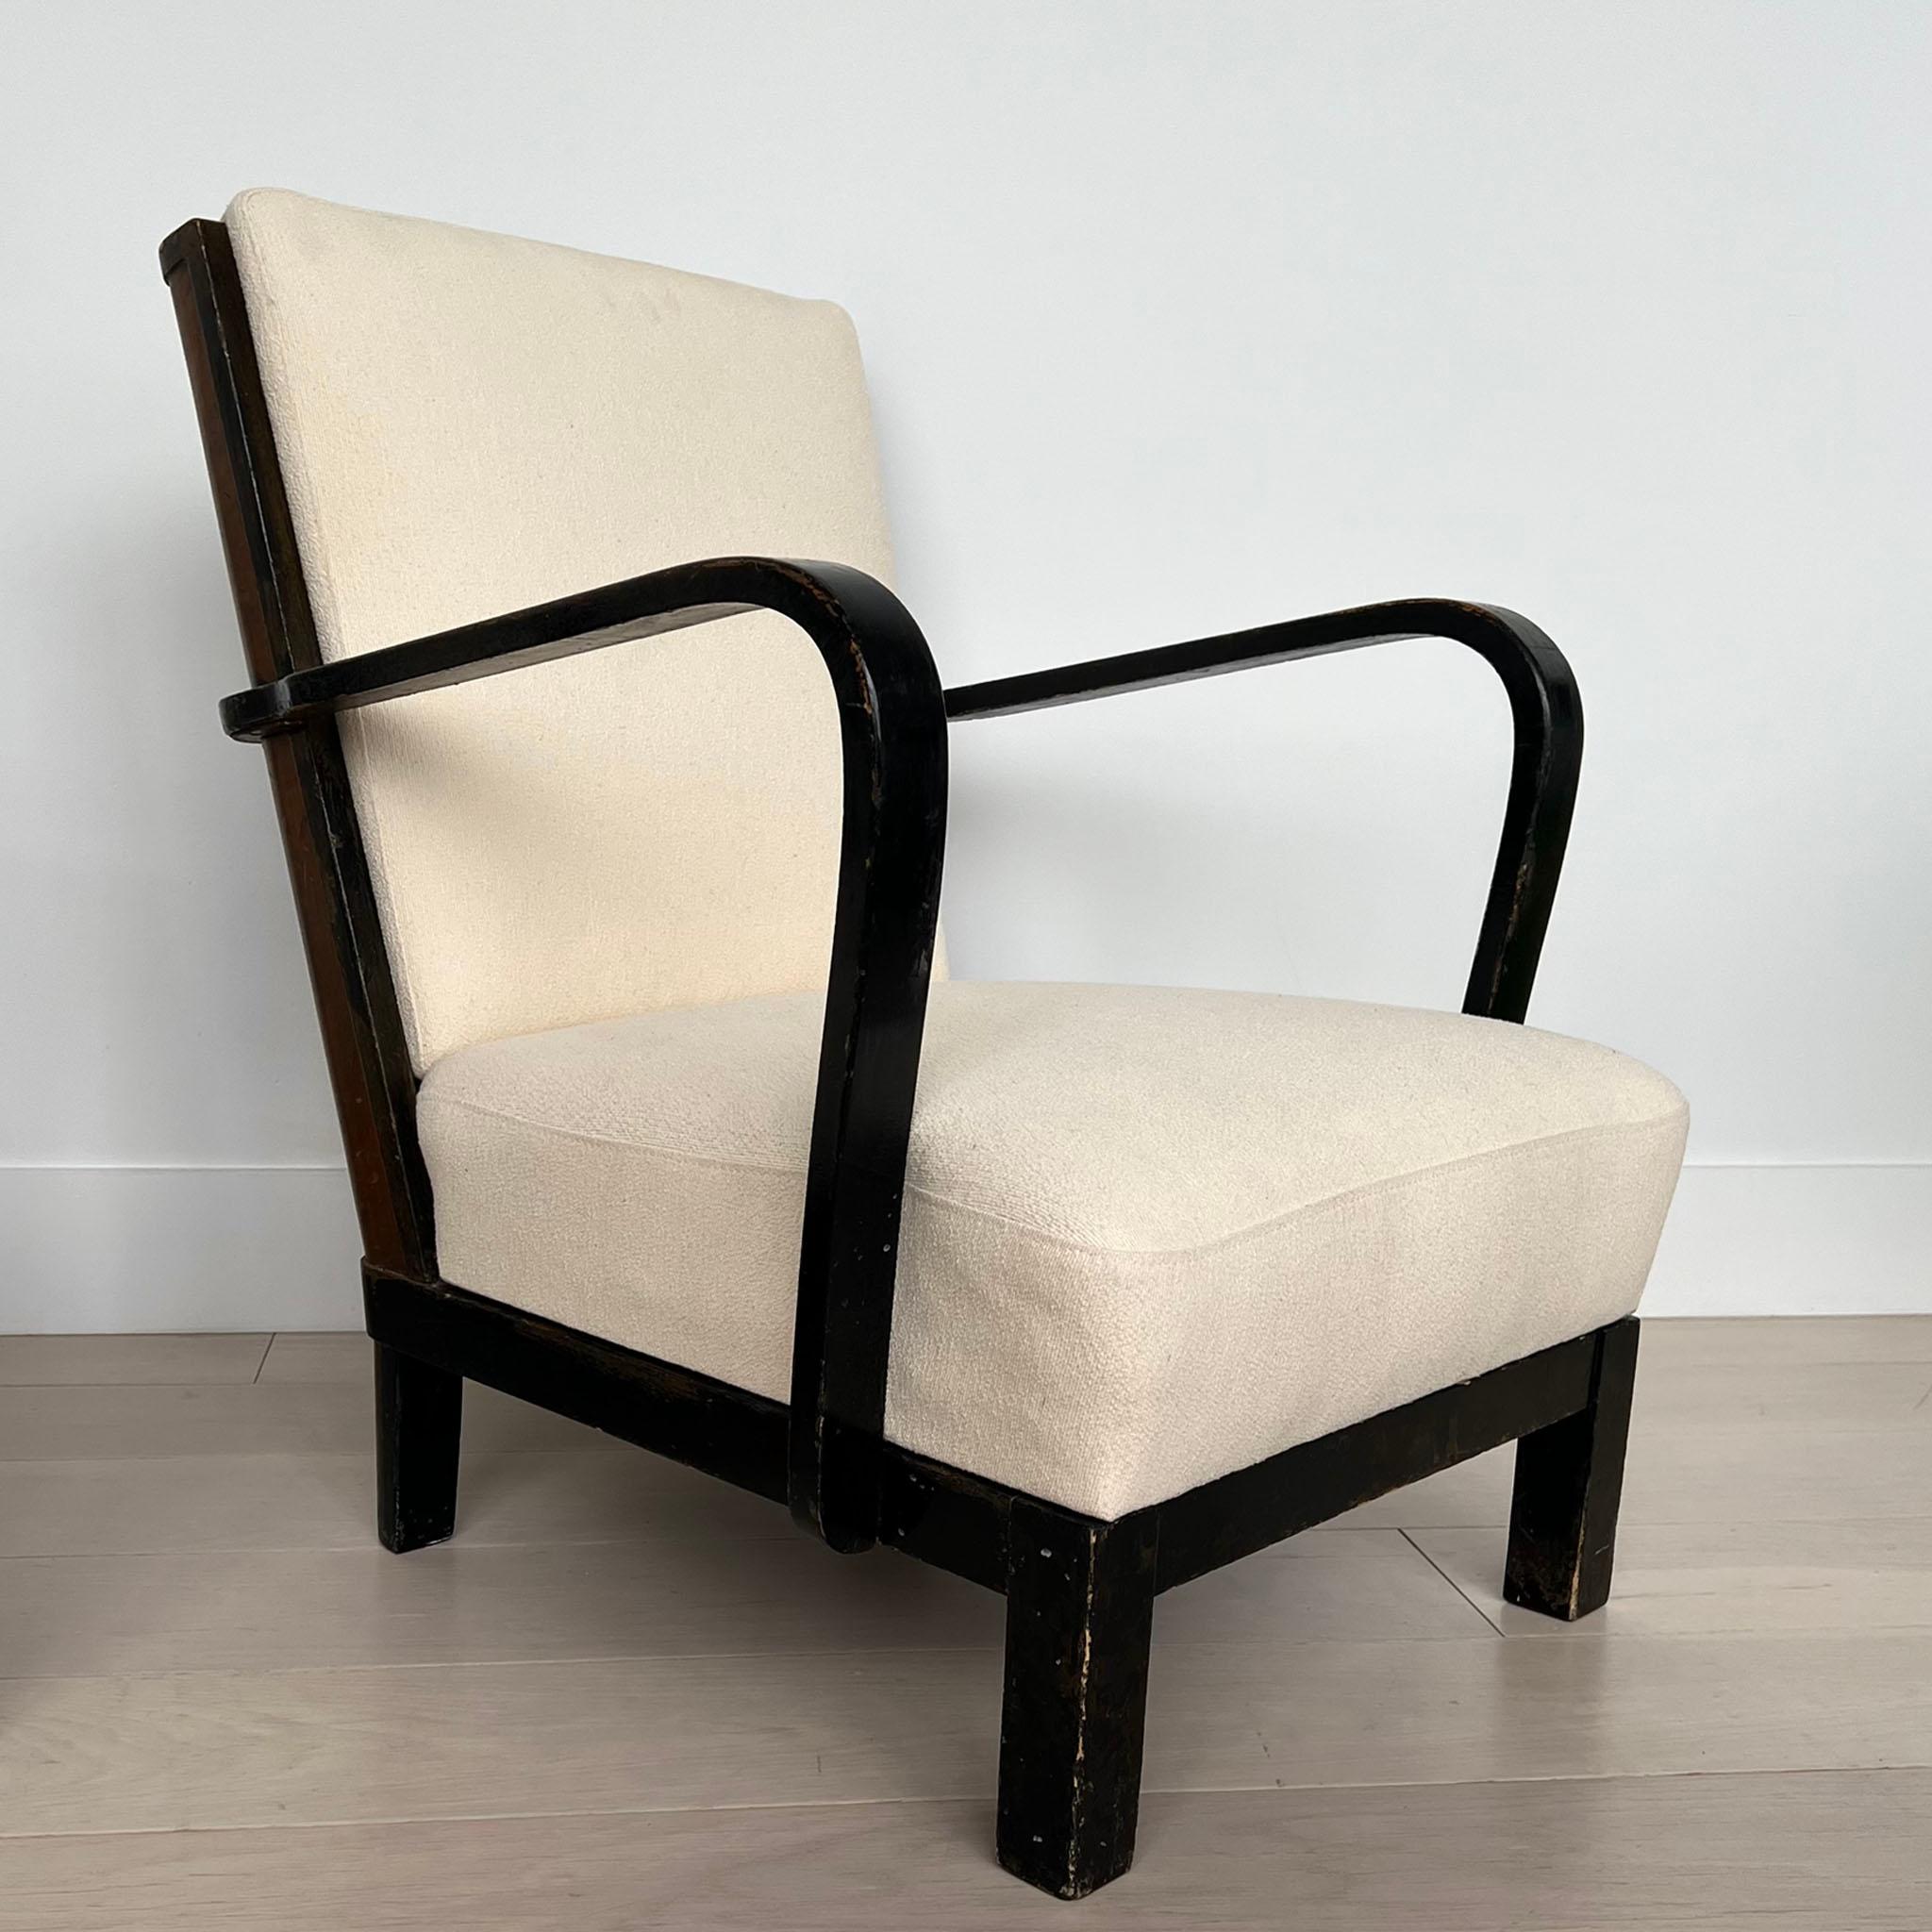 Art Deco Finnish Lounge Chairs, Ivory Boucle, Made by Asko, Finland 1935 For Sale 4